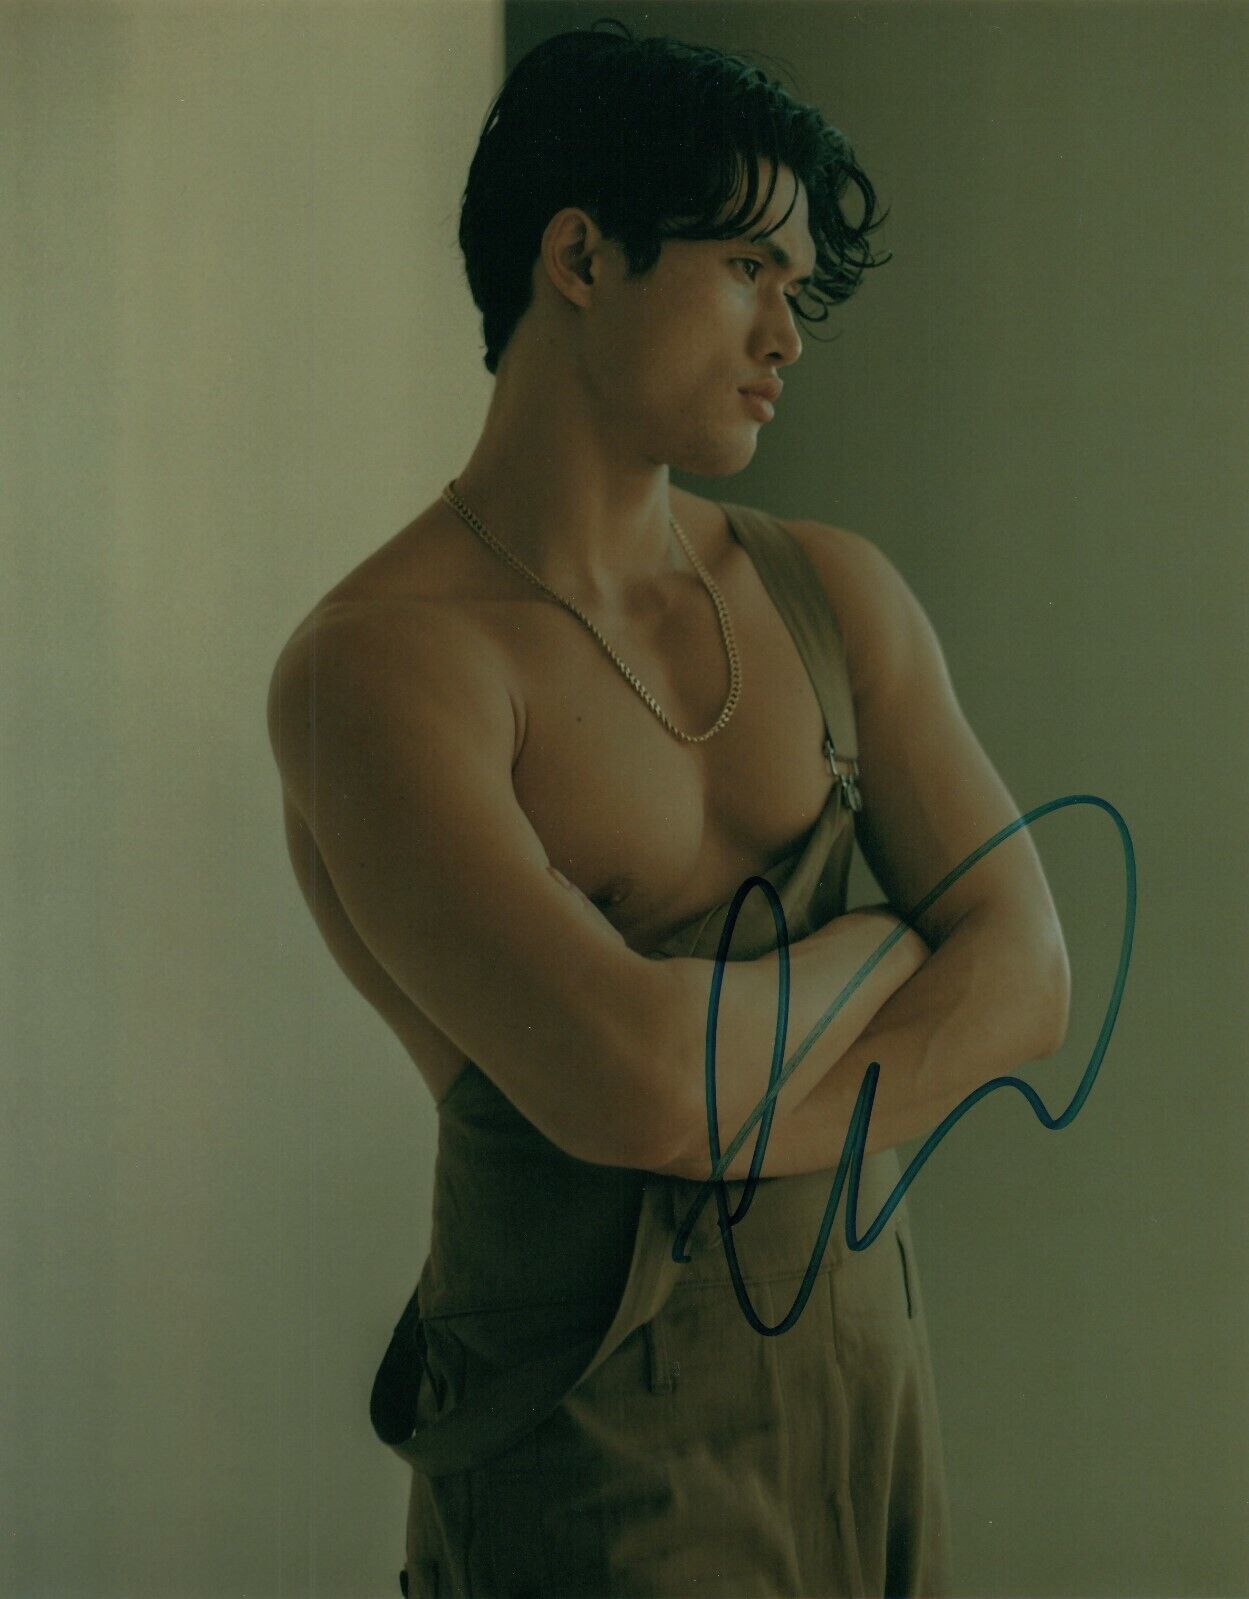 Charles Melton Shirtless Actor B&W Riverdale Signed 8x10 Photo Poster painting Autographed COA 4